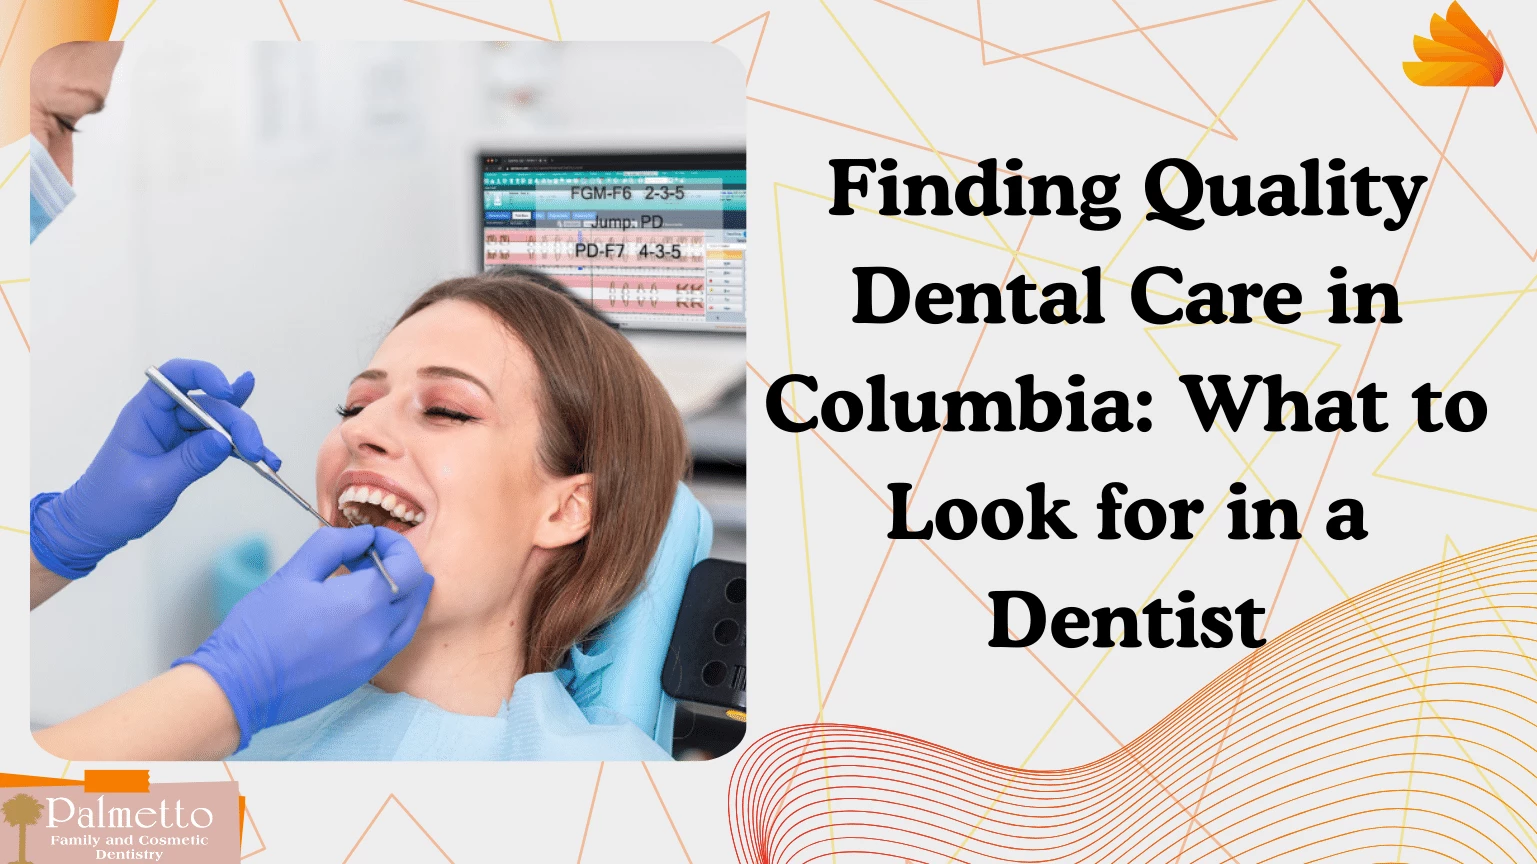 Finding Quality Dental Care in Columbia What to Look for in a Dentist